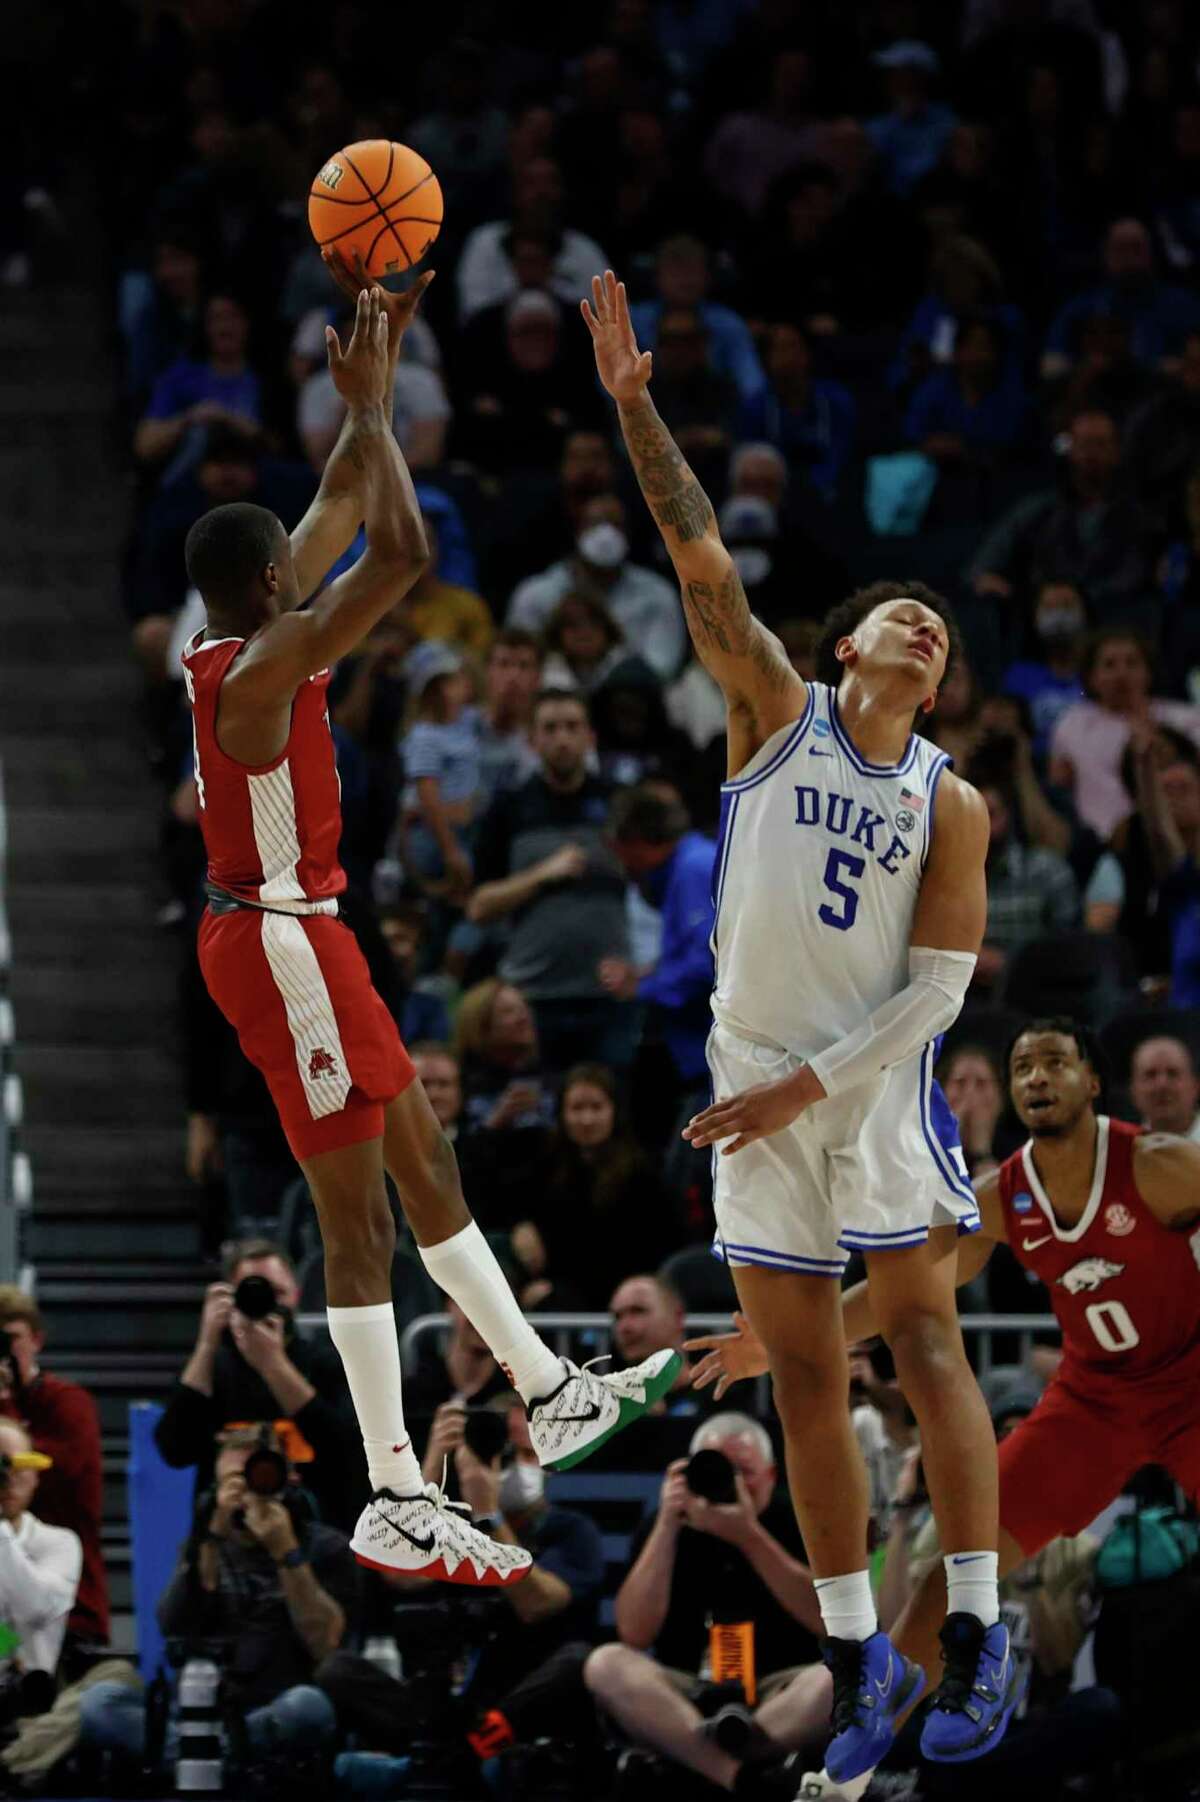 Arkansas guard Davonte Davis shoots a jumper as Duke forward Paolo Banchero defends during the first half of a college basketball game in the Elite 8 round game of the 2022 NCAA Men's Basketball Tournament at Chase Center in San Francisco, Saturday, March 26, 2022.